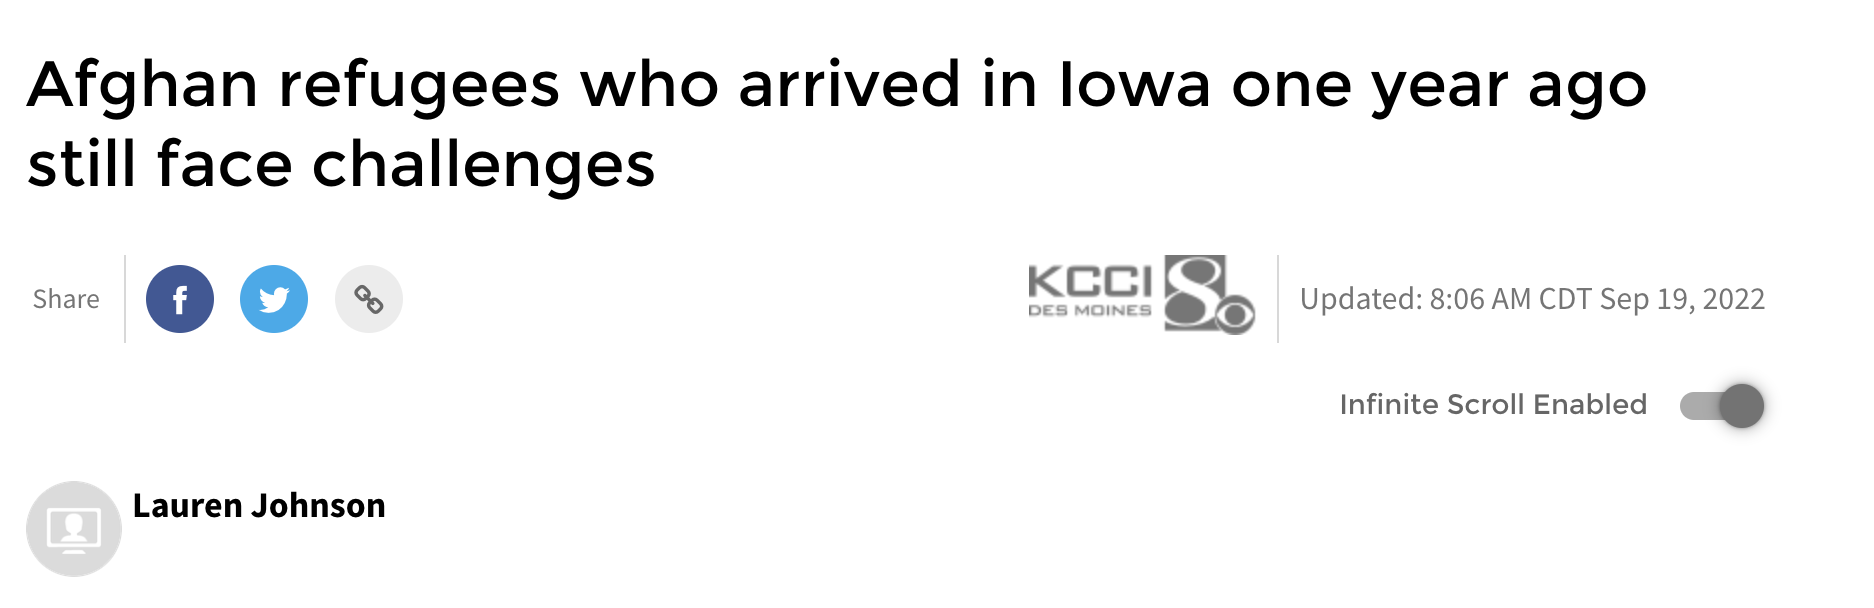 Article headline "Afghan refugees who arrived in Iowa one year ago still face challenges"